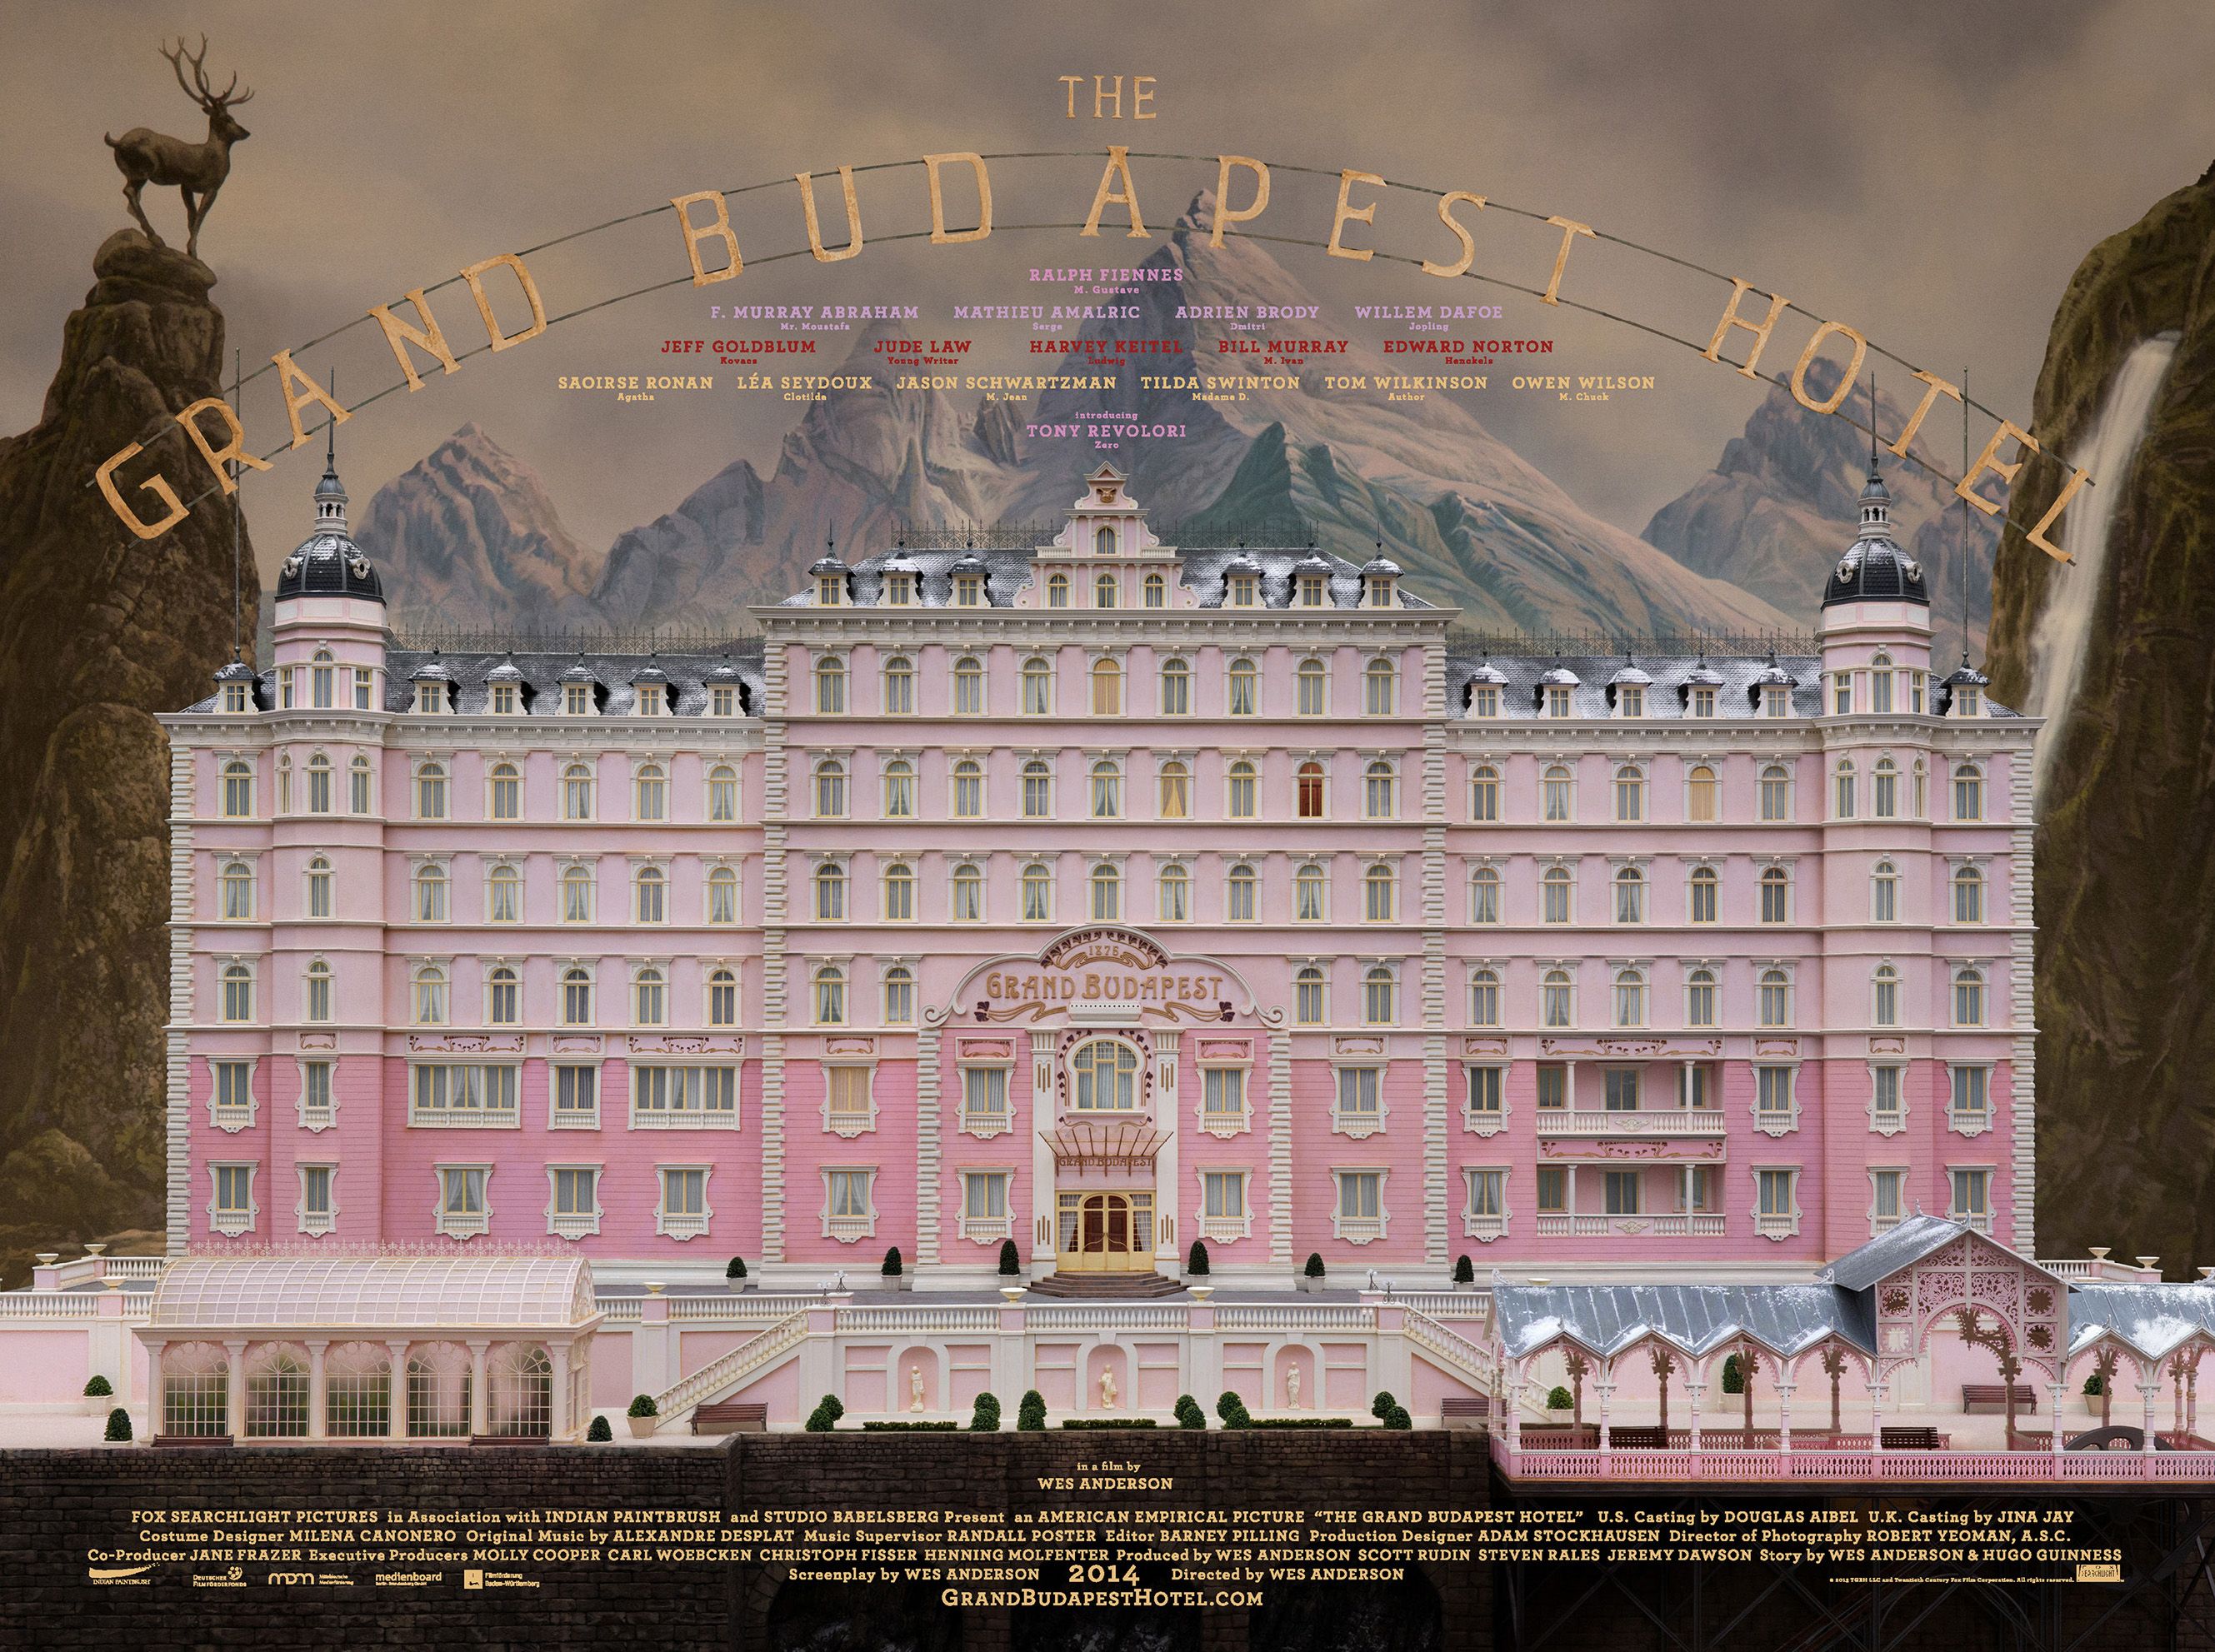 Best Posters Of 2013: The Grand Budapest Hotel